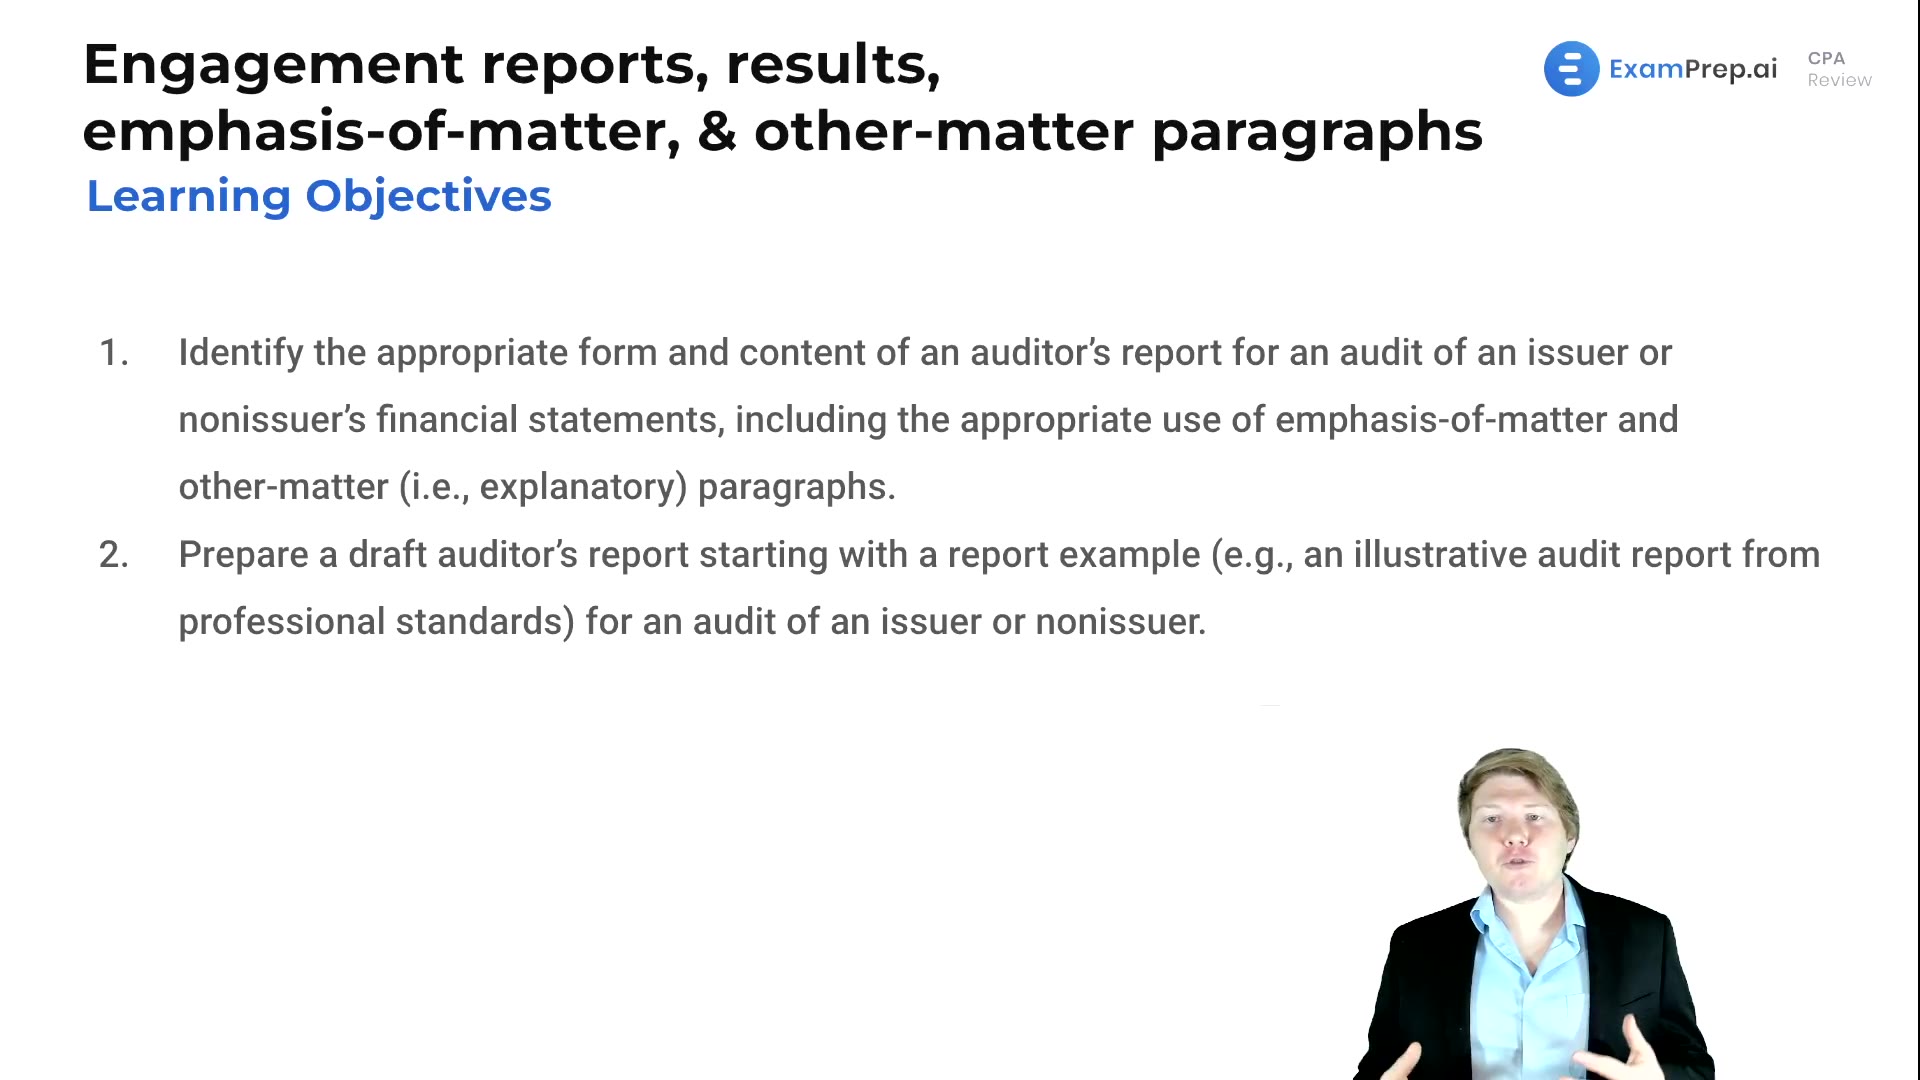 Engagement Reports, Results, Emphasis-of-matter, & Other-matter Paragraphs Objectives lesson thumbnail